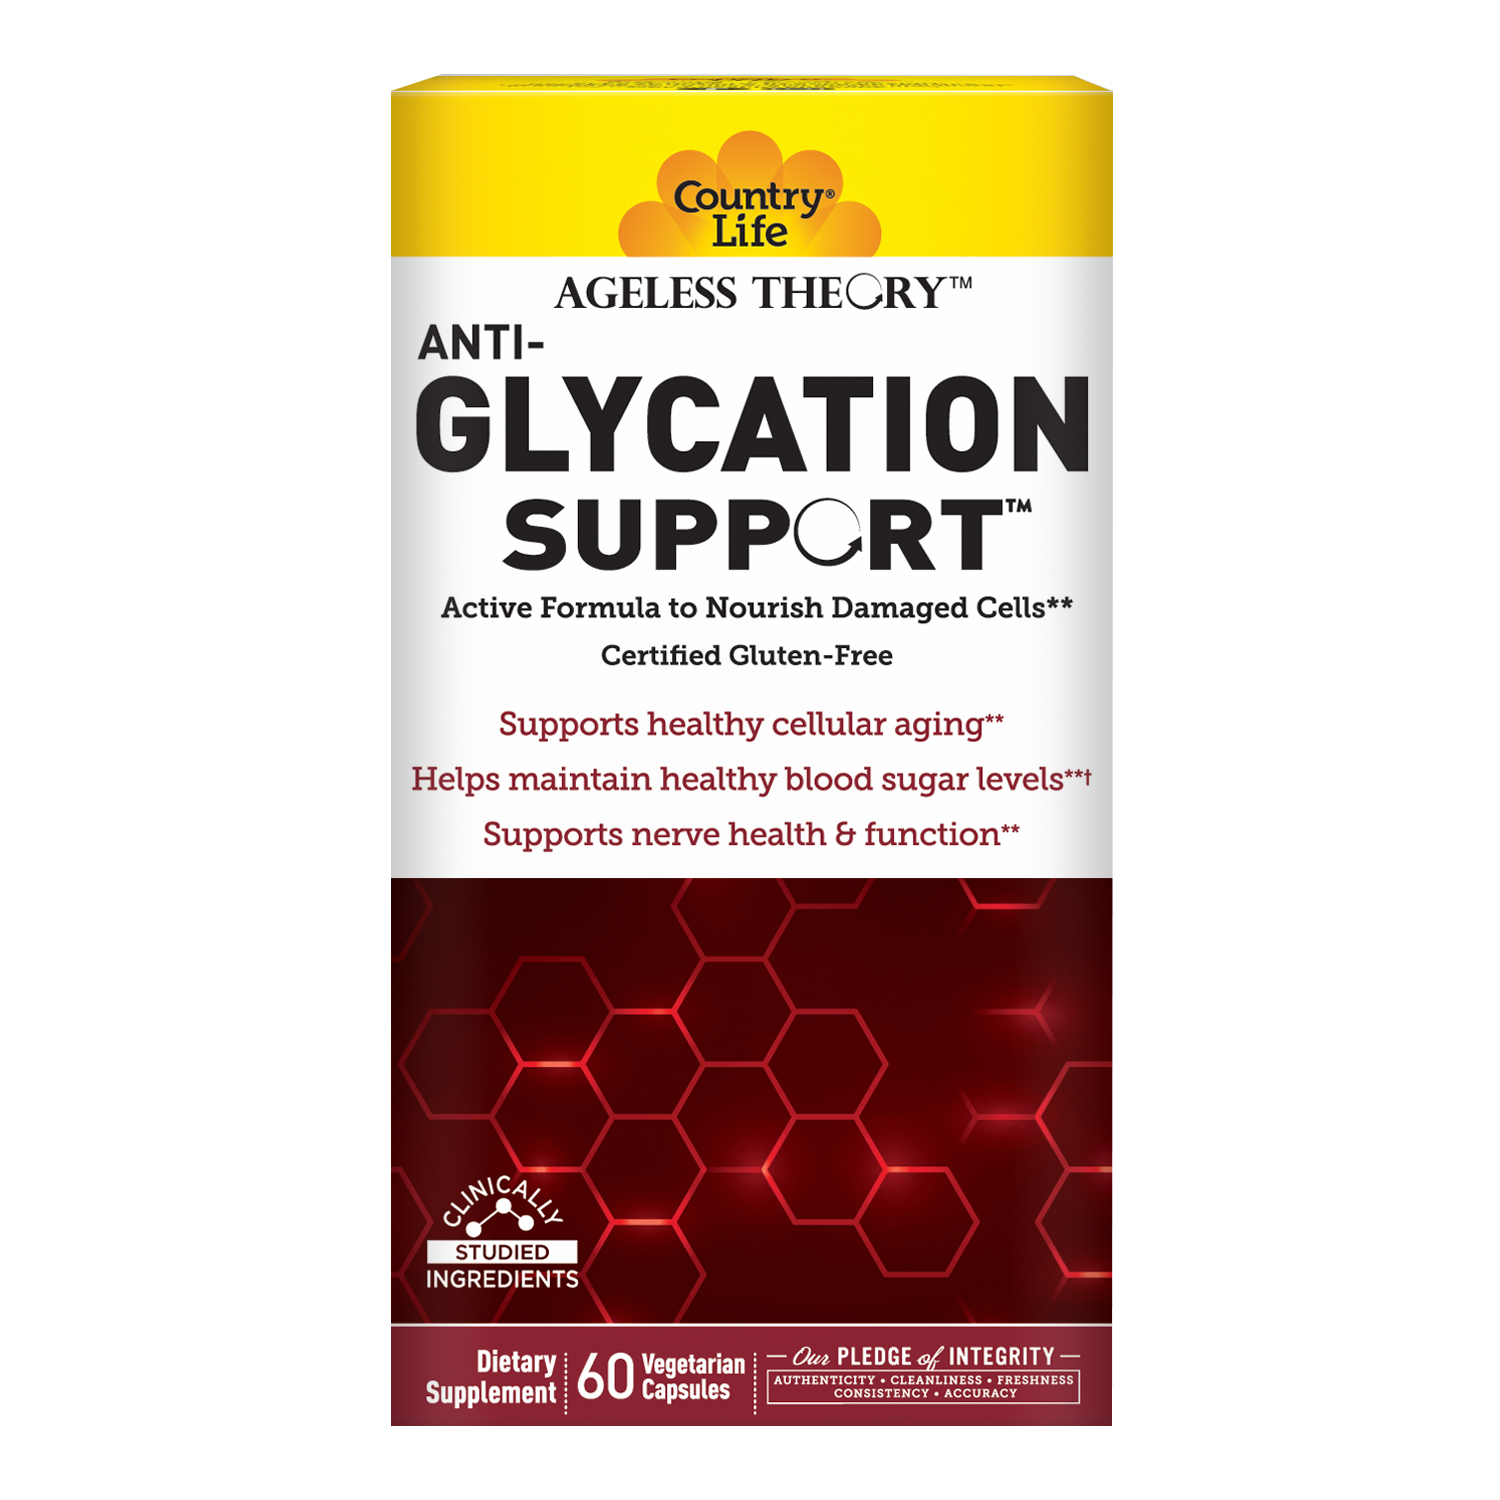 Ageless Theory™ Anti-Glycation Support™